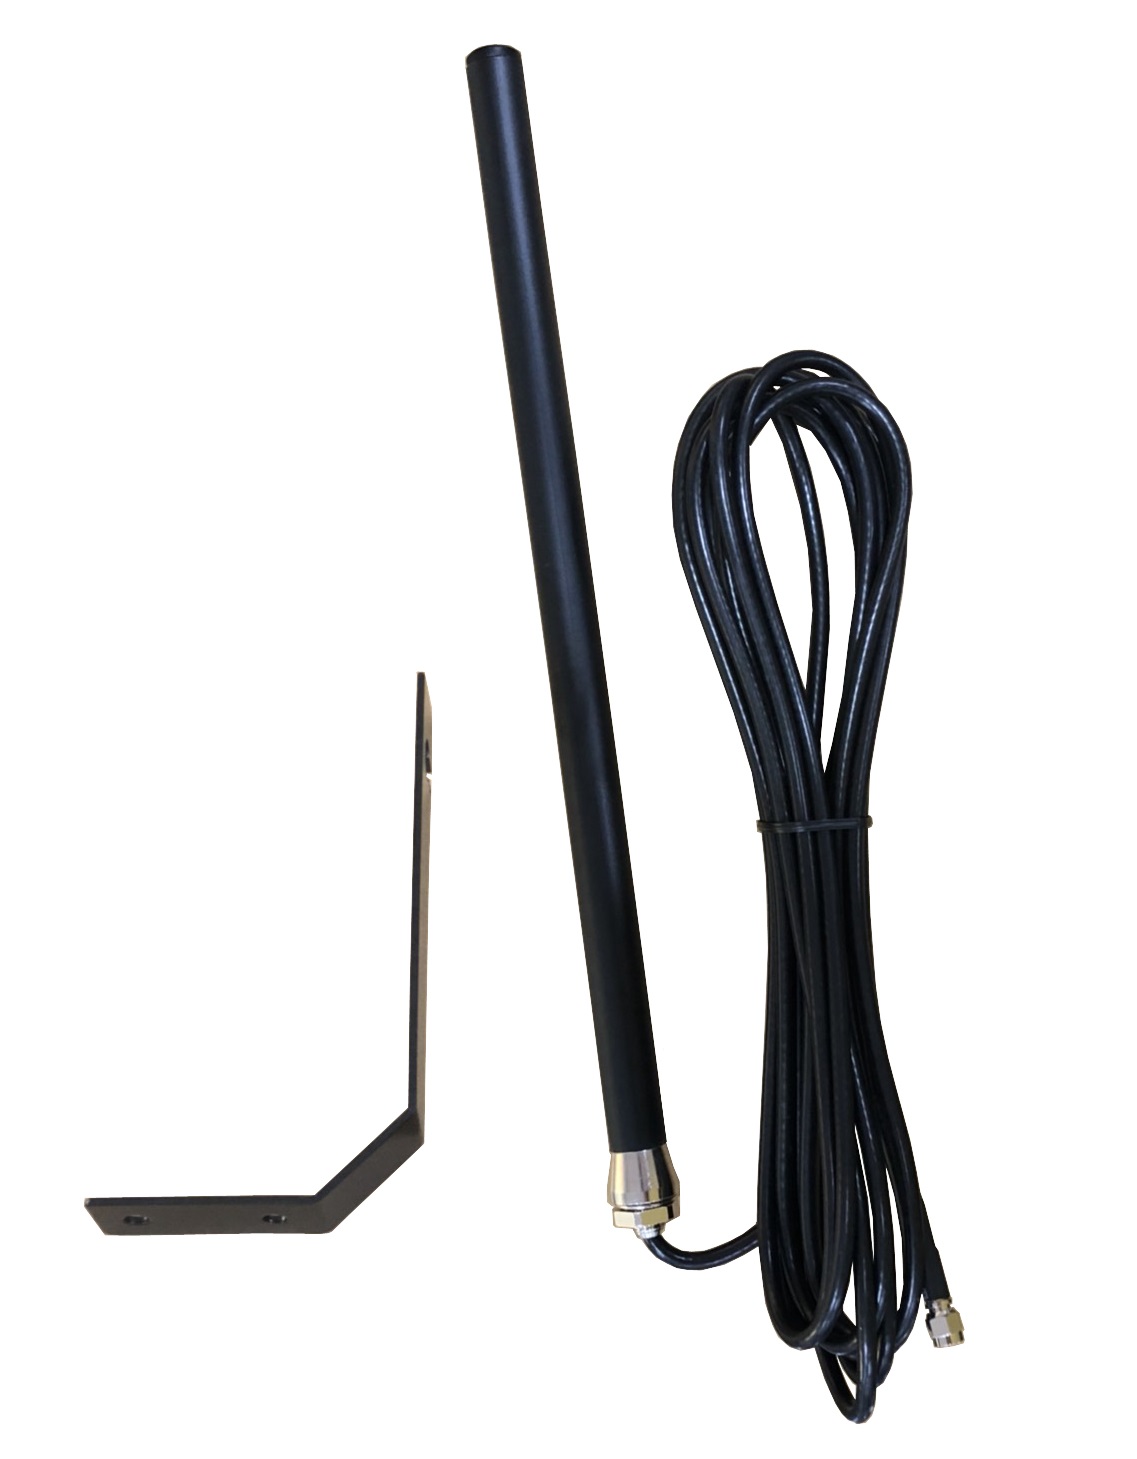 4x4 Pick Up OMNI Antenna for Car Electronic Accessories made by Chinmore Industry Co., LTD.　竣茂工業有限公司 - MatchSupplier.com